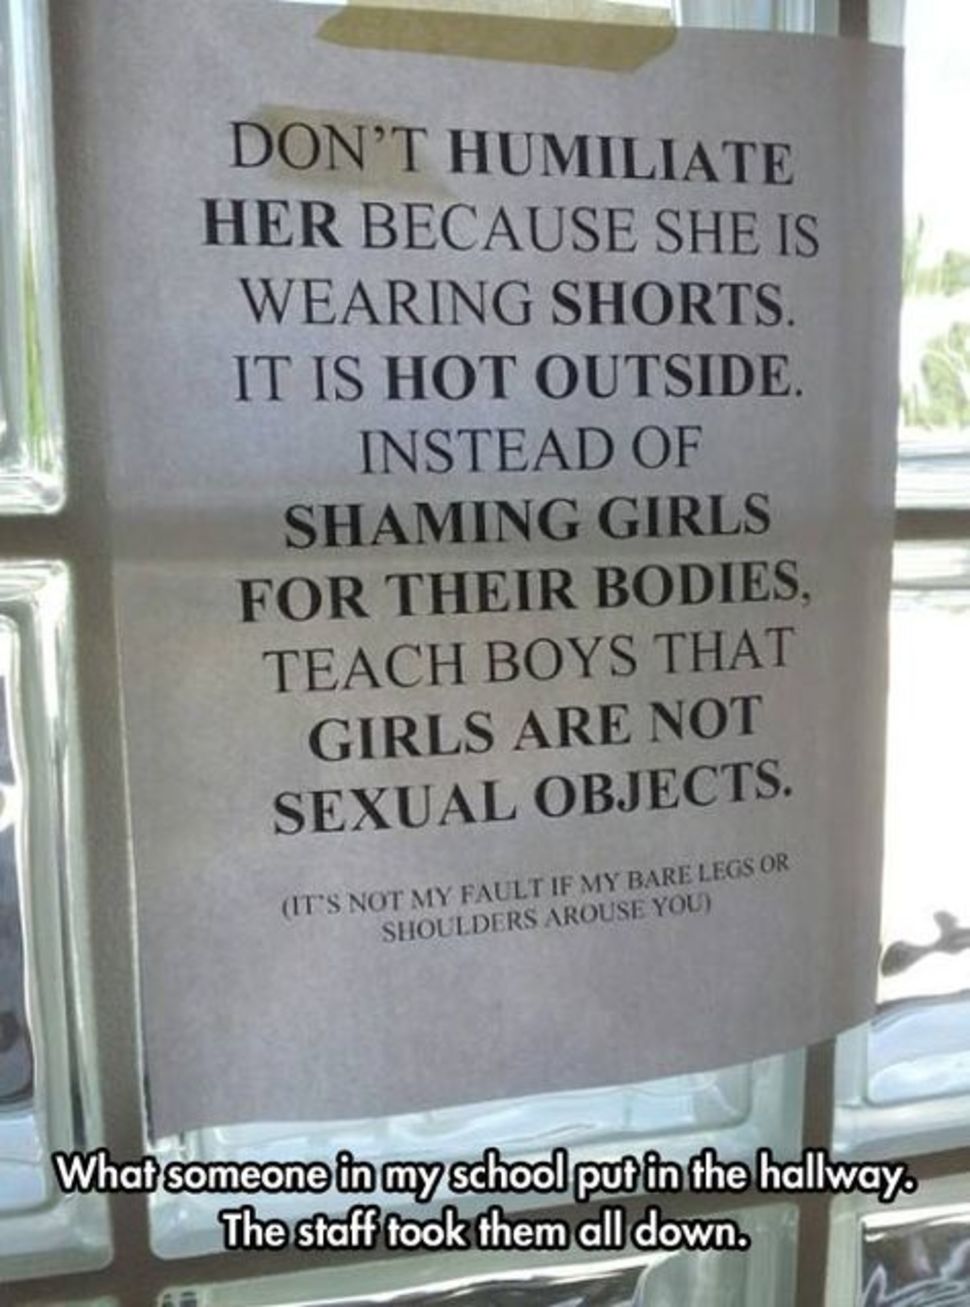 The students started opposing the ridiculous sexist dress code.